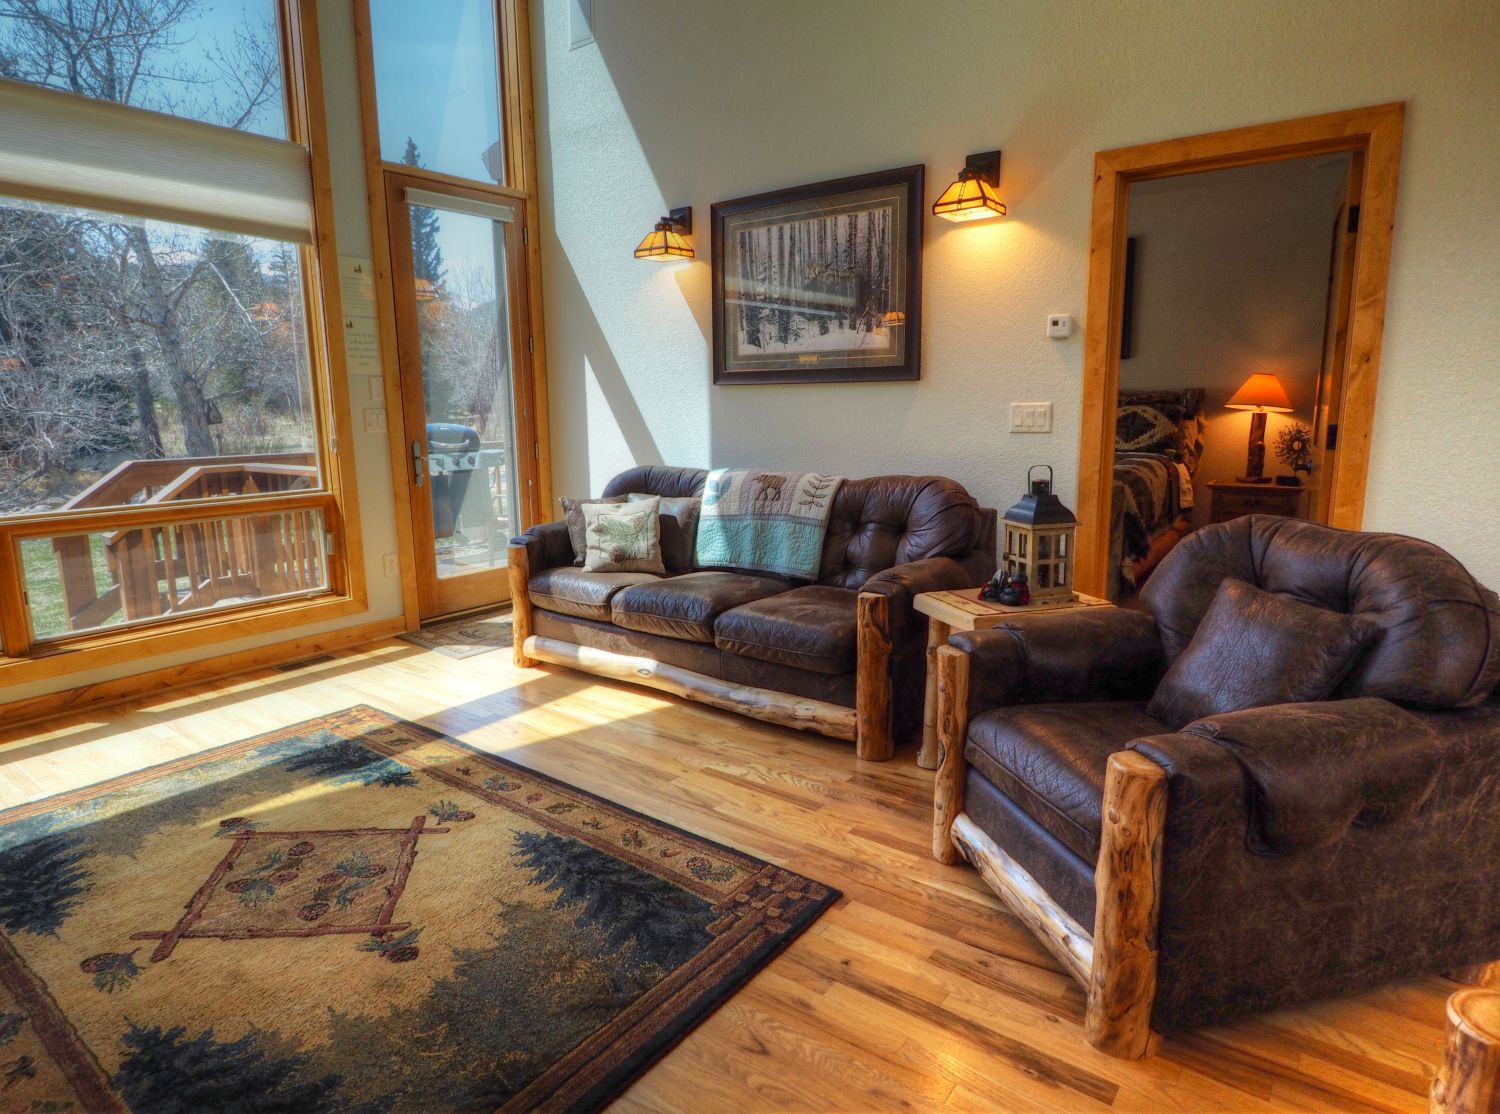 Rambling River Condo - Living area with door to outside deck and entry to master suite